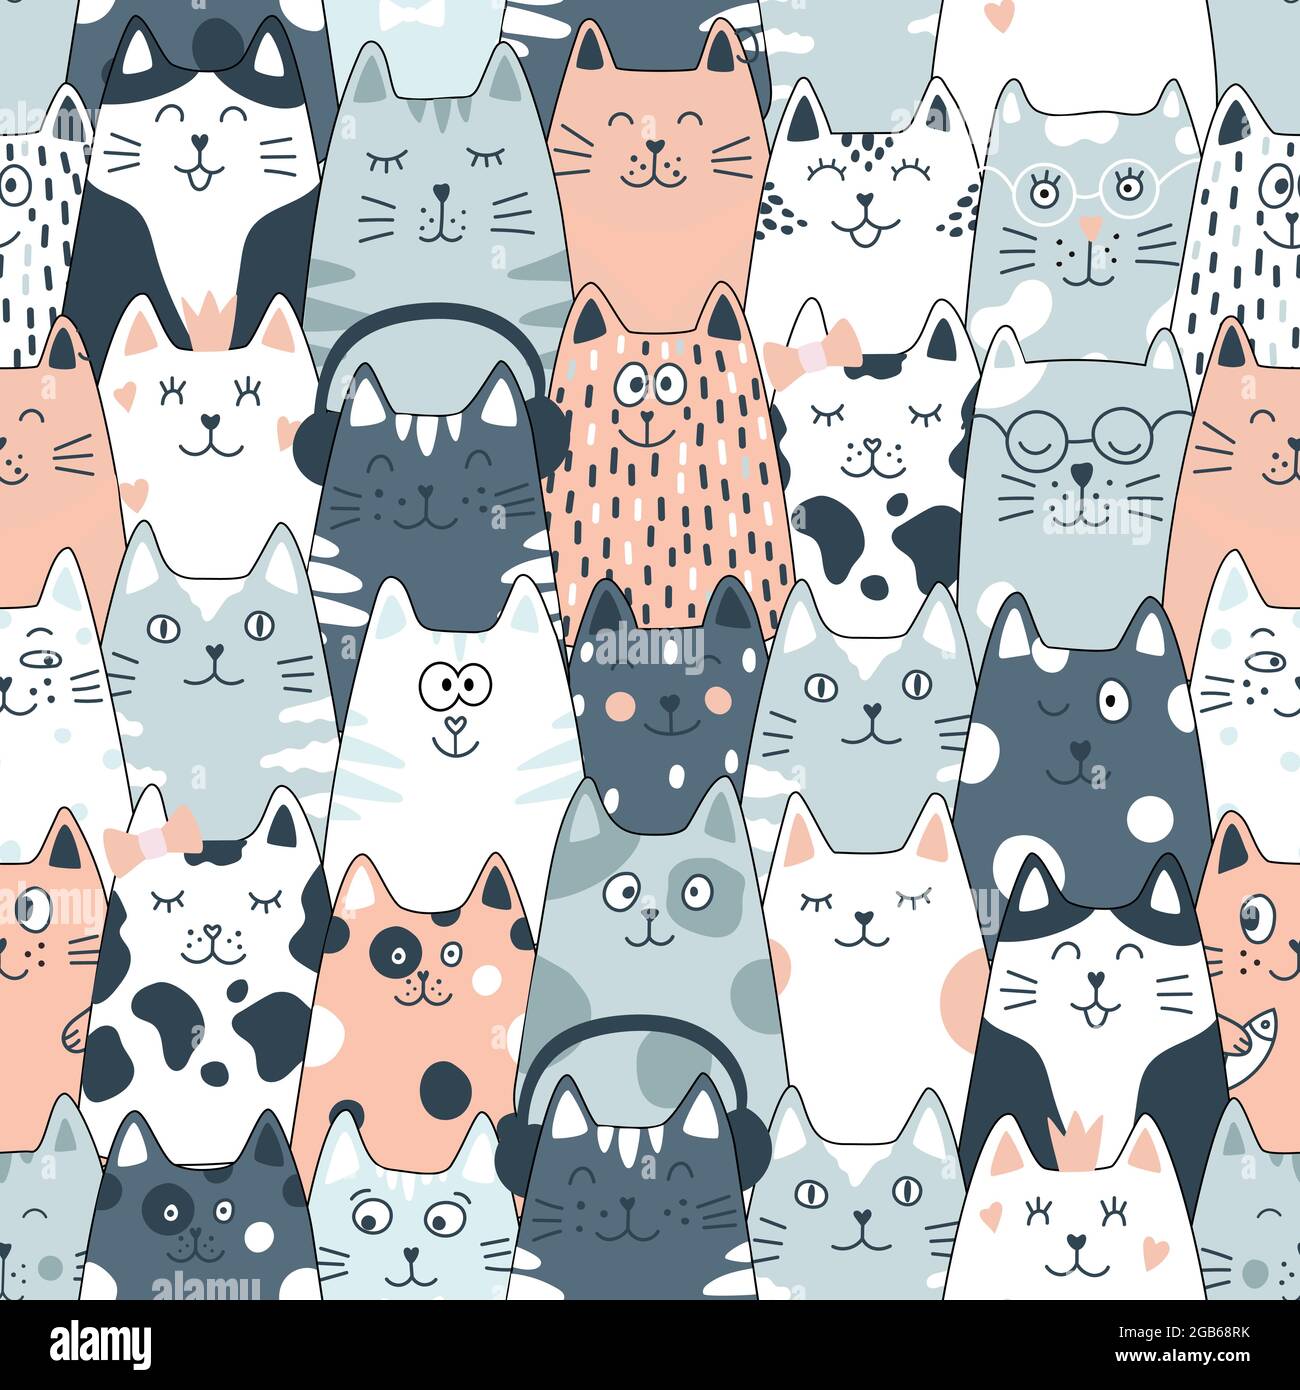 Seamless pattern with cats. Cute cat set. Funny cartoon animal ...